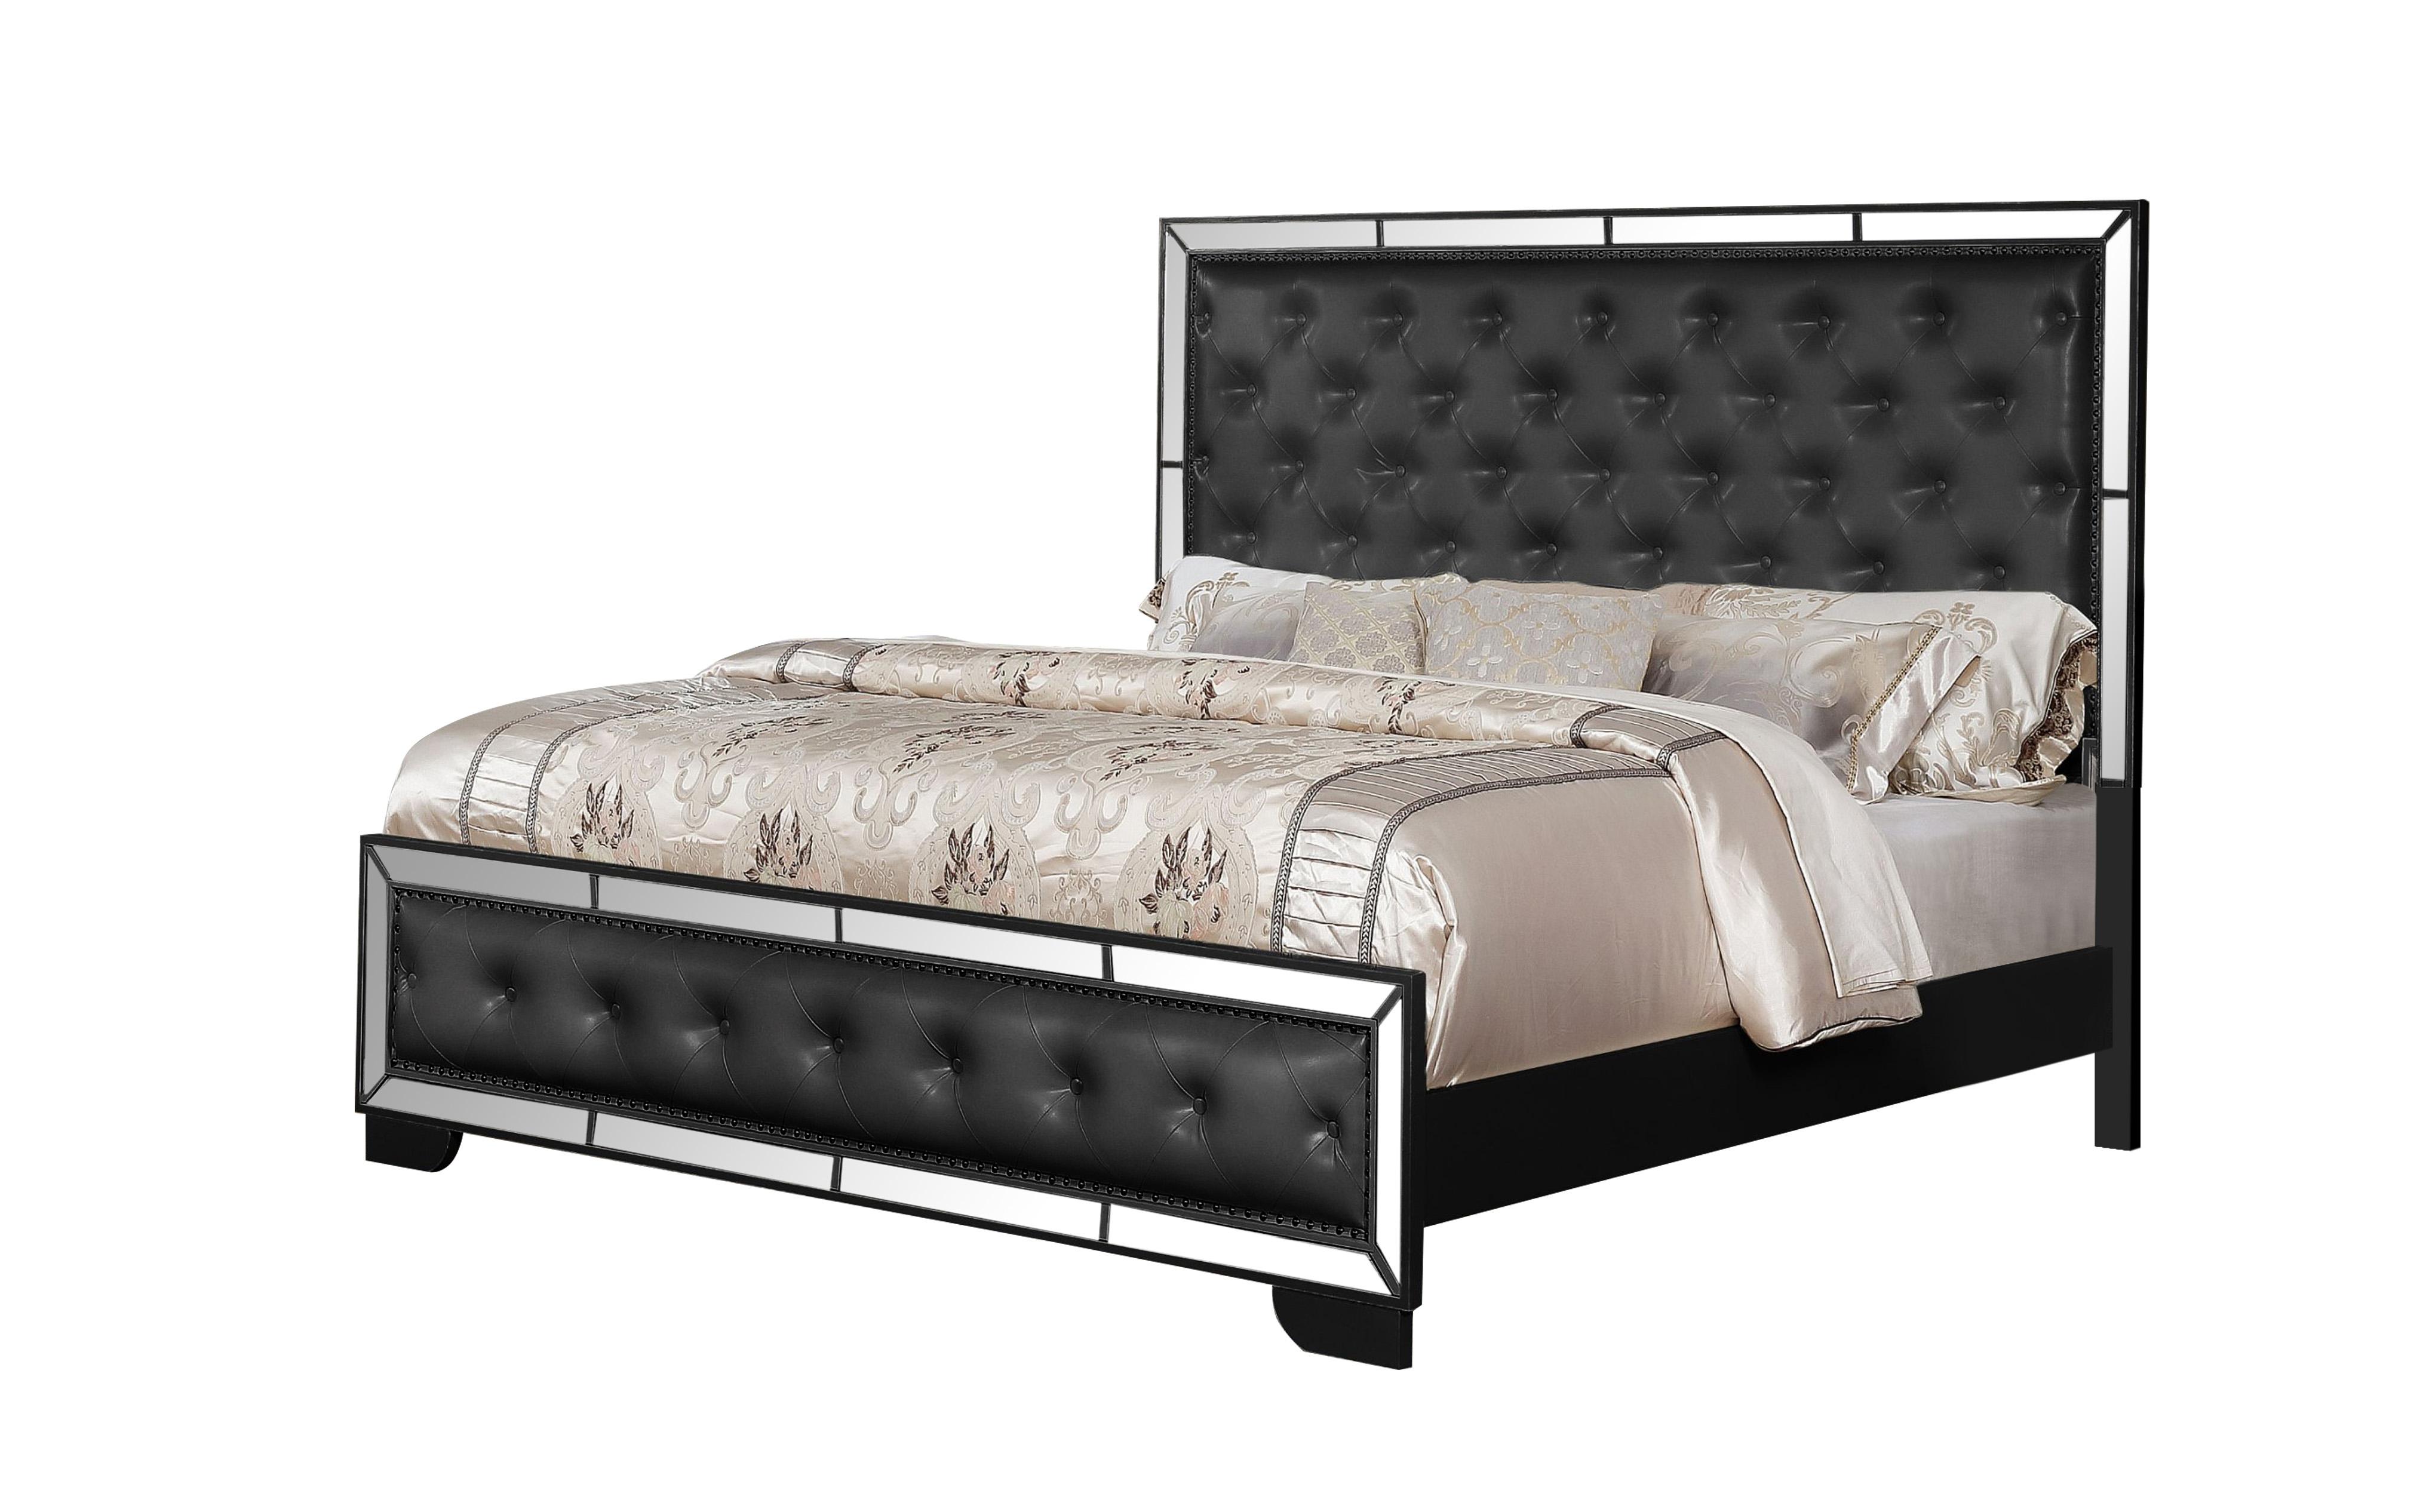 

    
Glam Black Mirrored Inlay Tufted Queen Bedroom Set 5P MADISON Galaxy Home Modern
